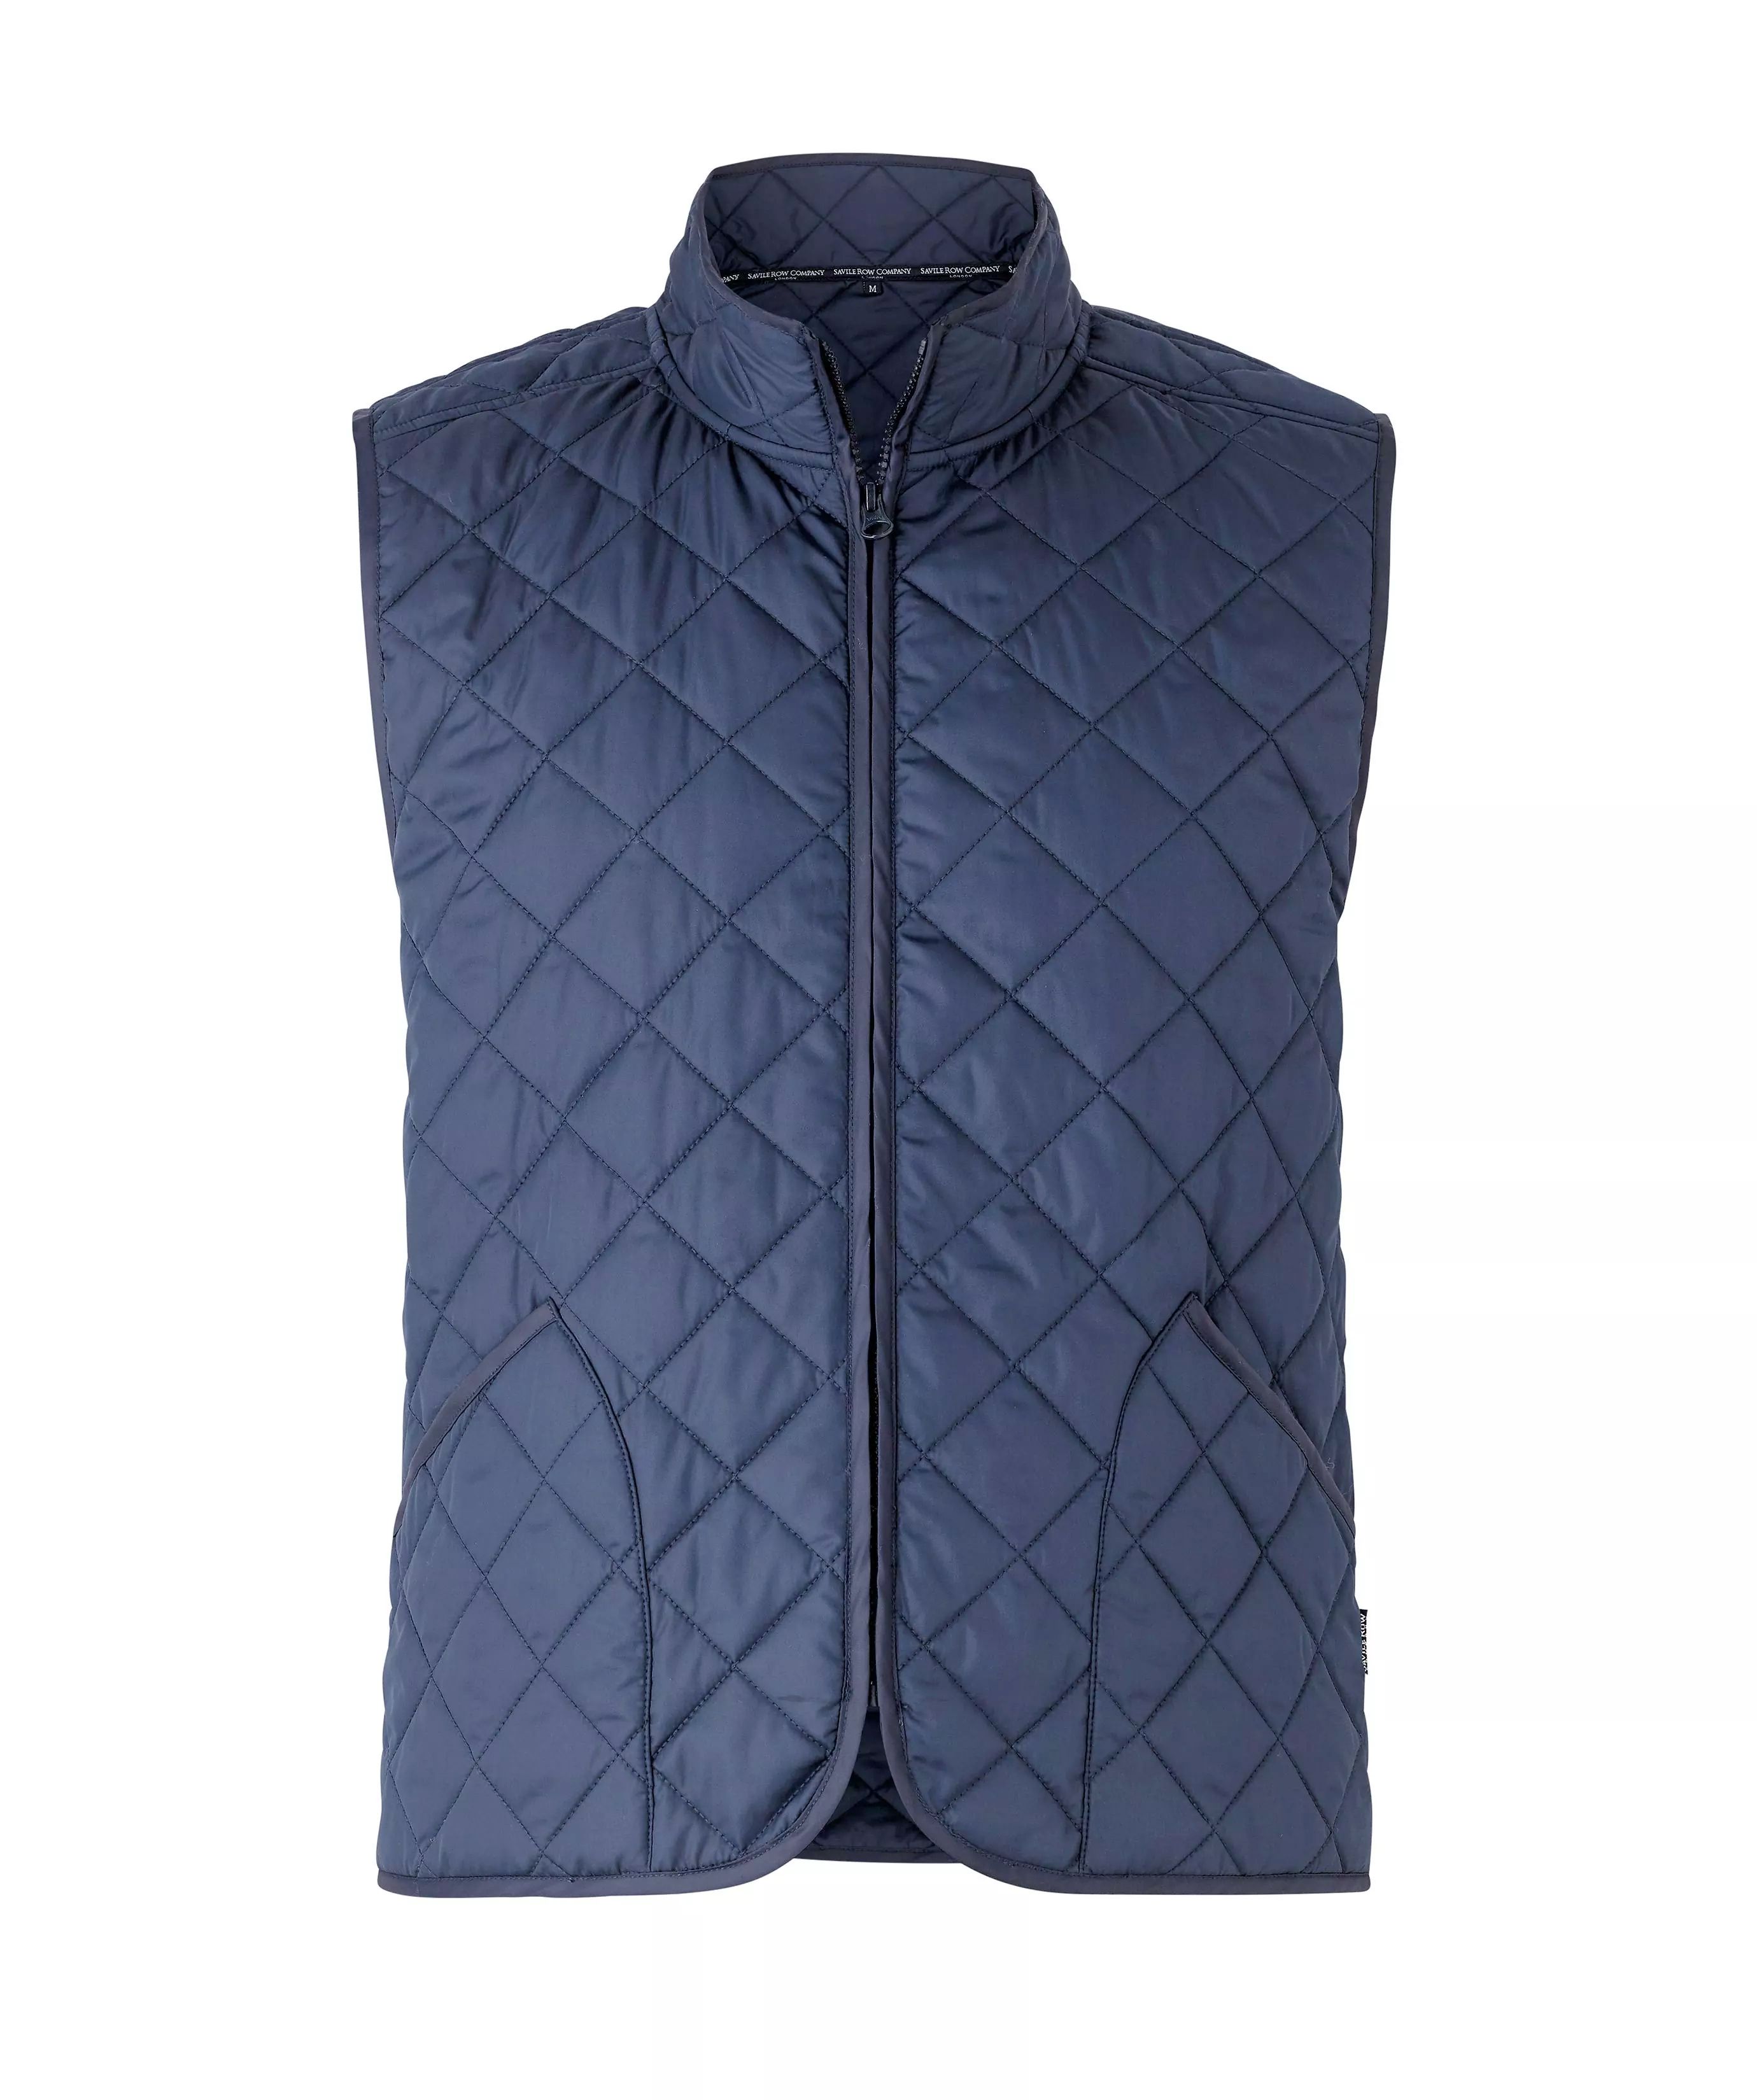 Men's Navy Quilted Gilet | Savile Row Co